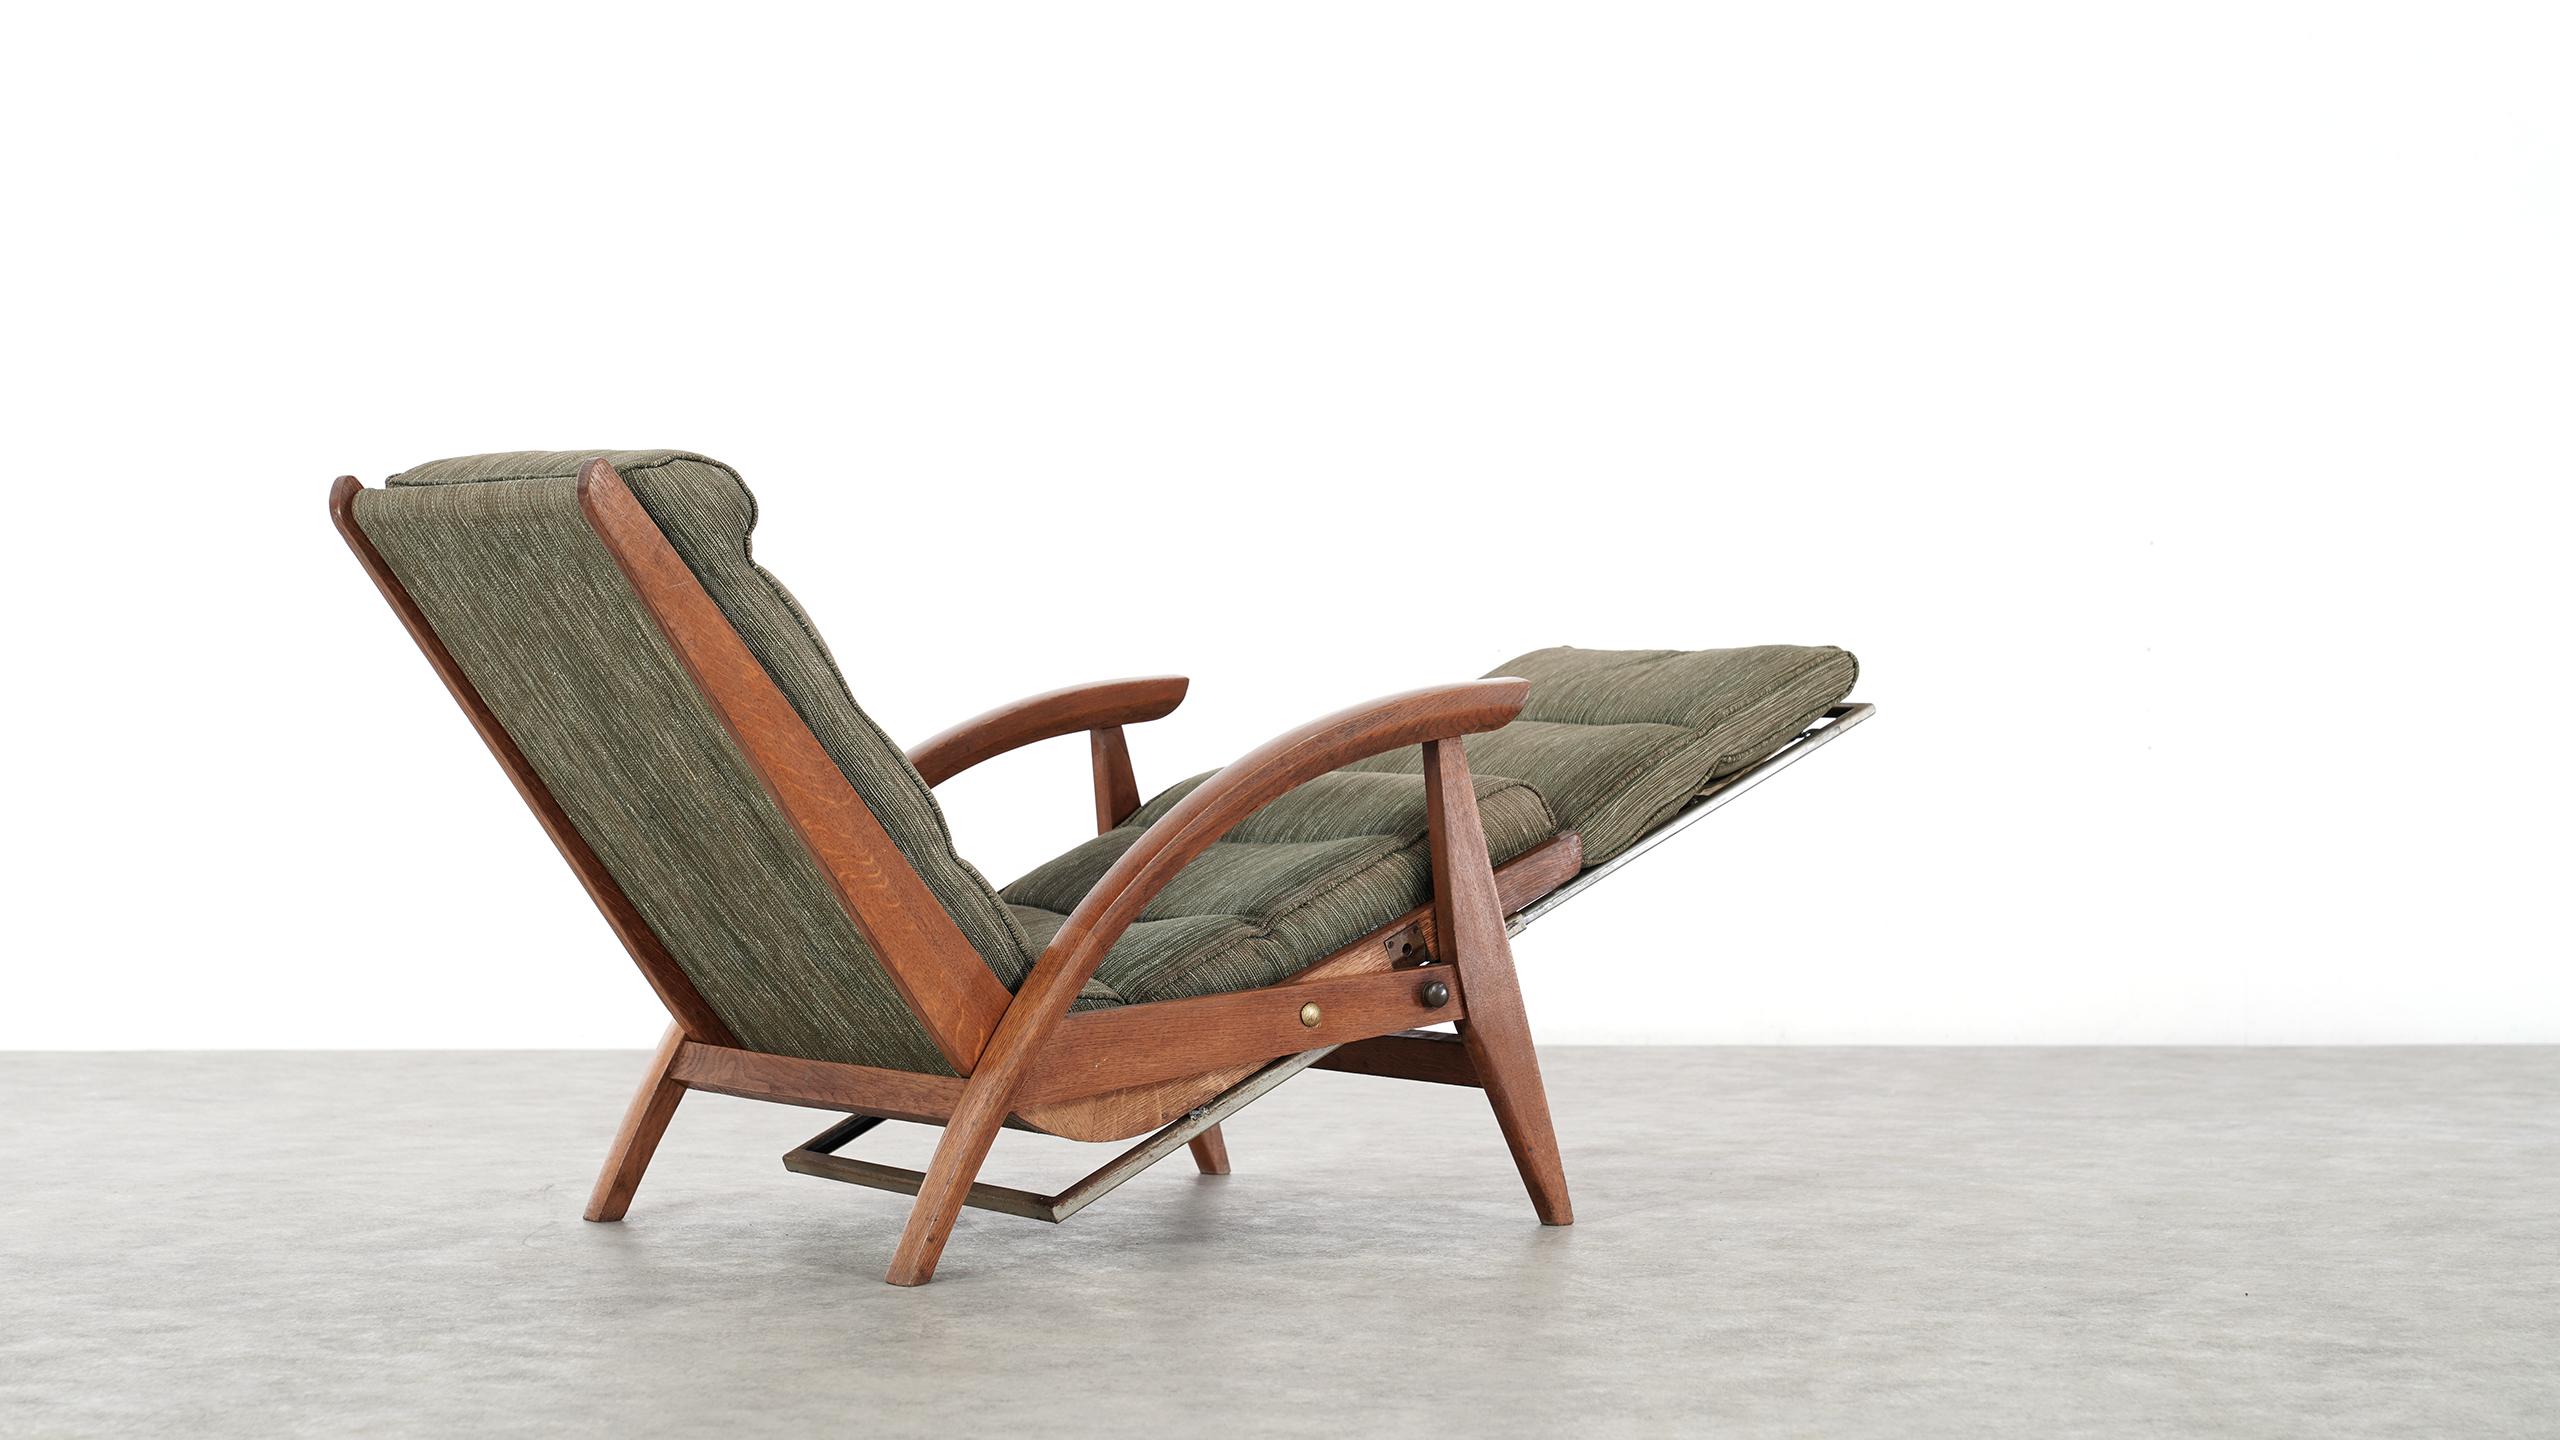 Guy Besnard FS 134 Reclining Lounge Chair, 1954 for Free Span, France Prouvé 3